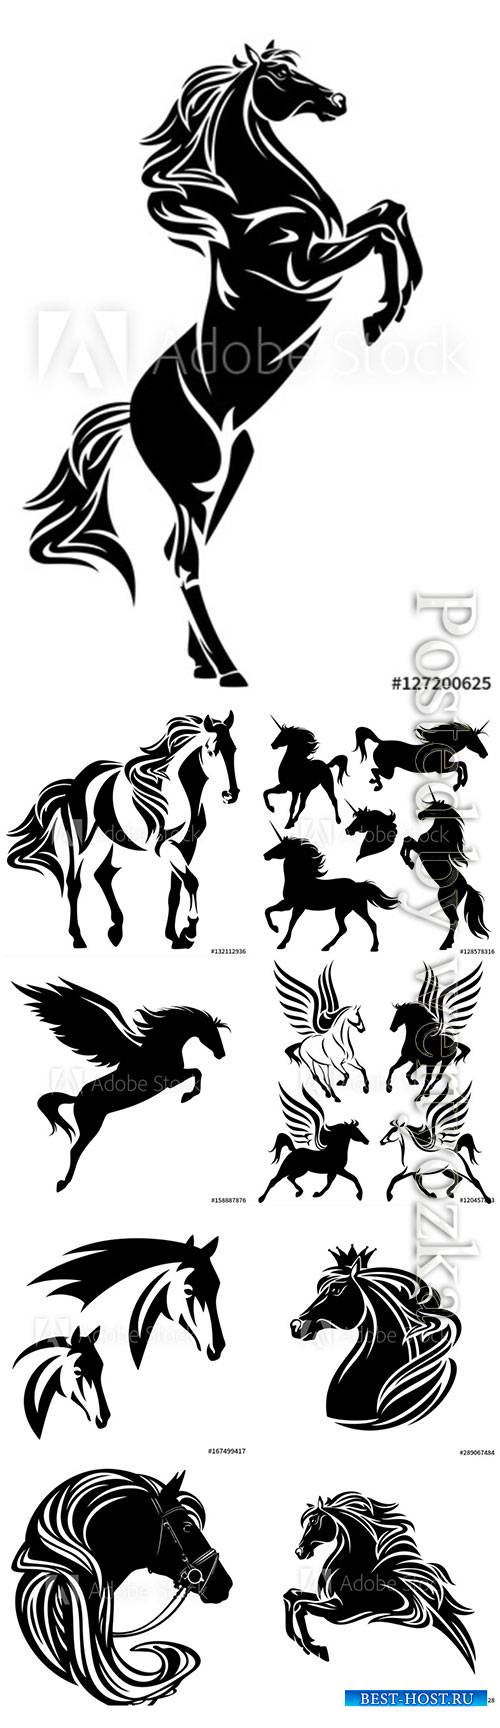 Horses, unicorns and pegasuses in vector